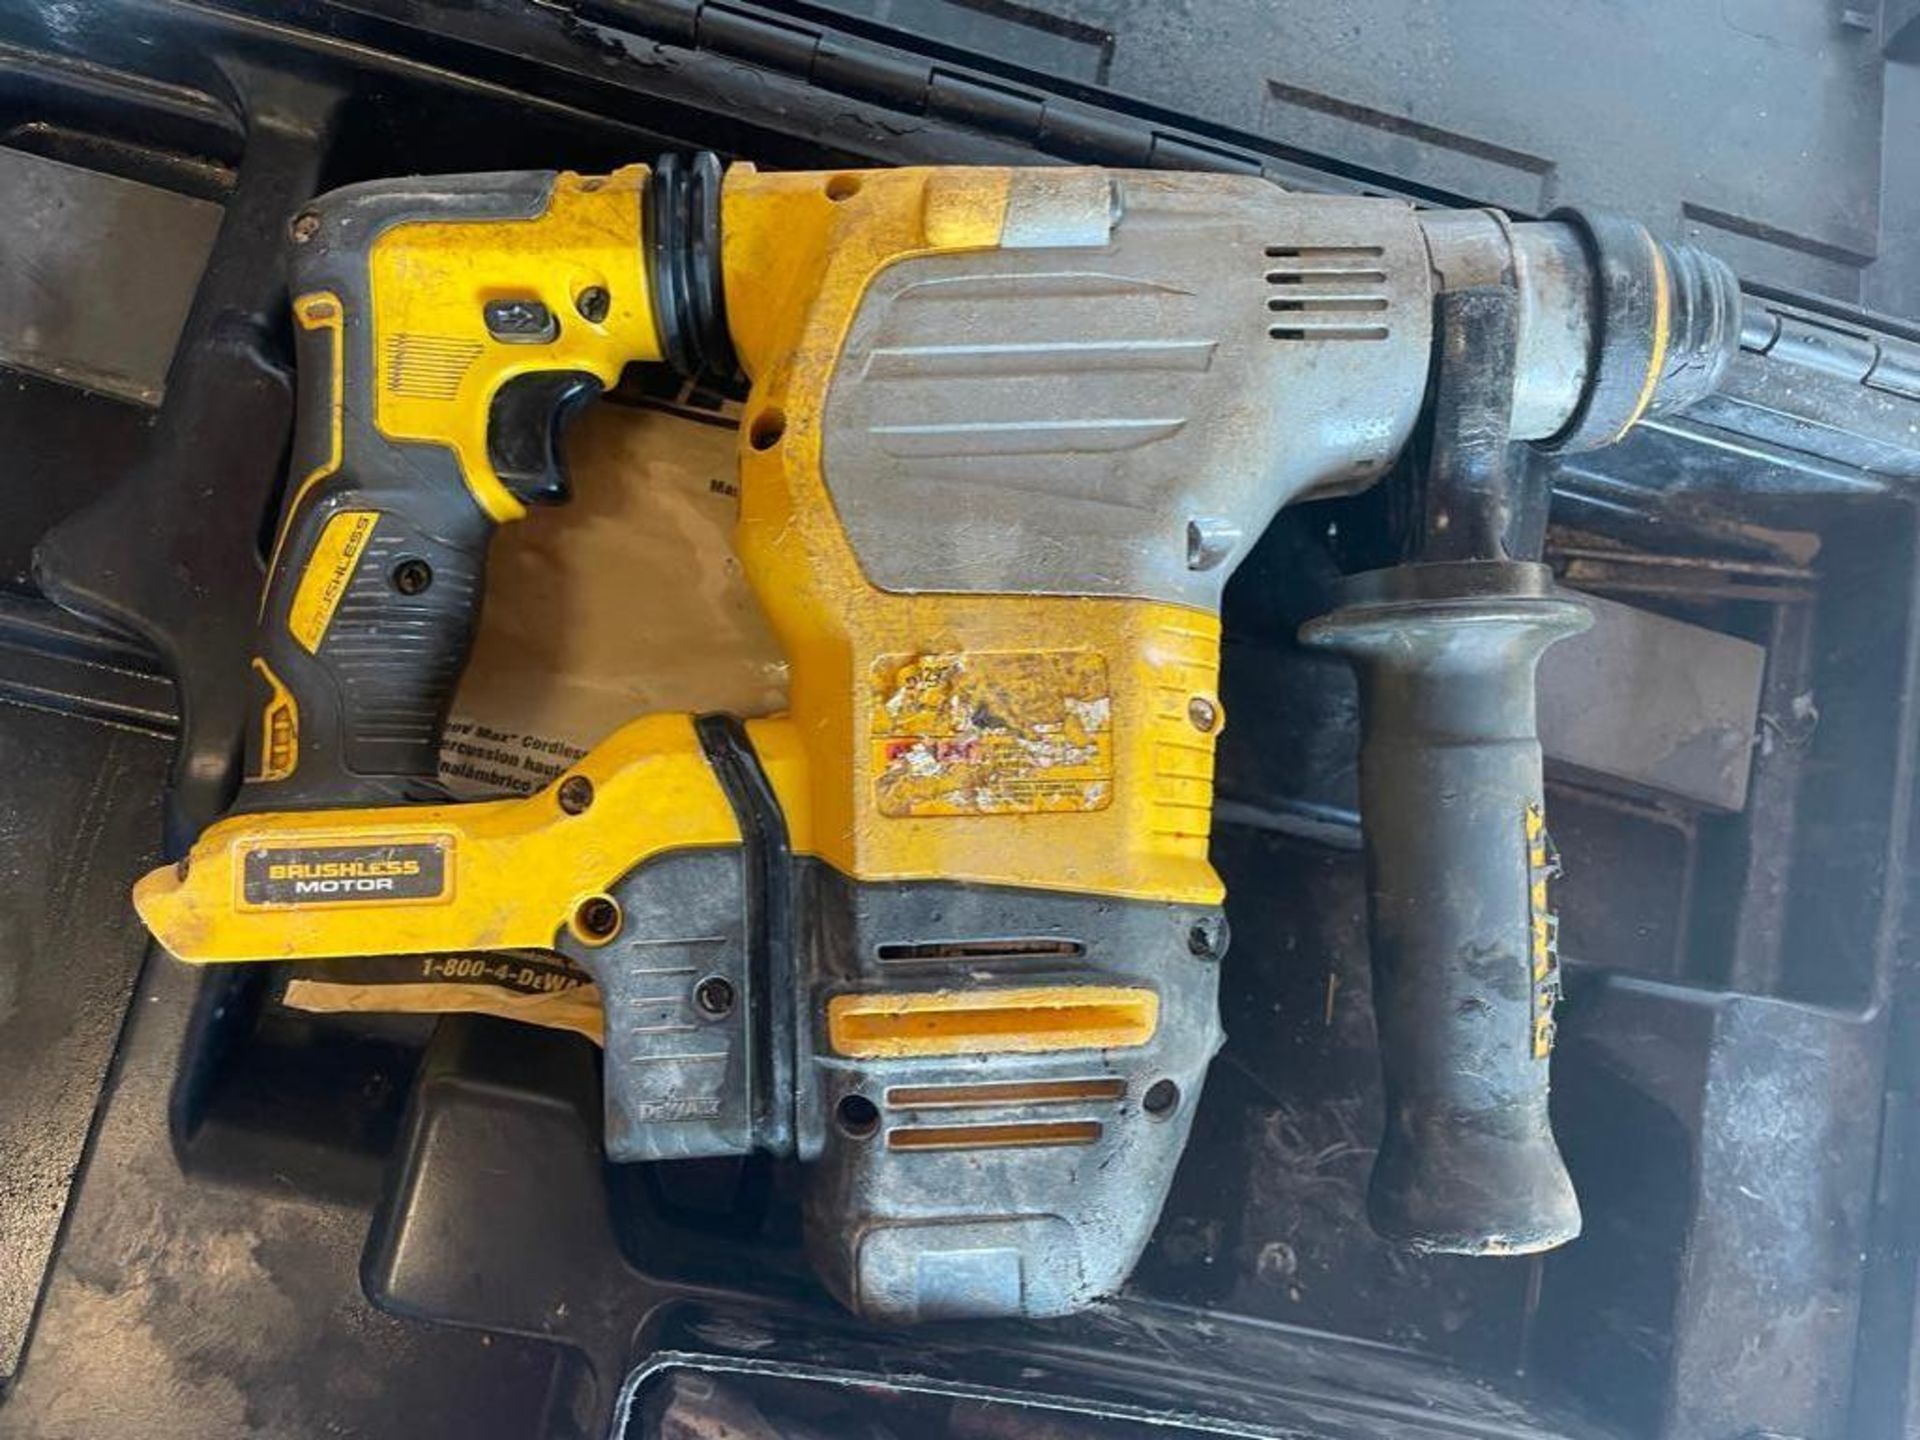 DeWalt DCH293 20V Heavy Duty Cordless Rotary Hammer in Case. Located in Hazelwood, MO - Image 4 of 7